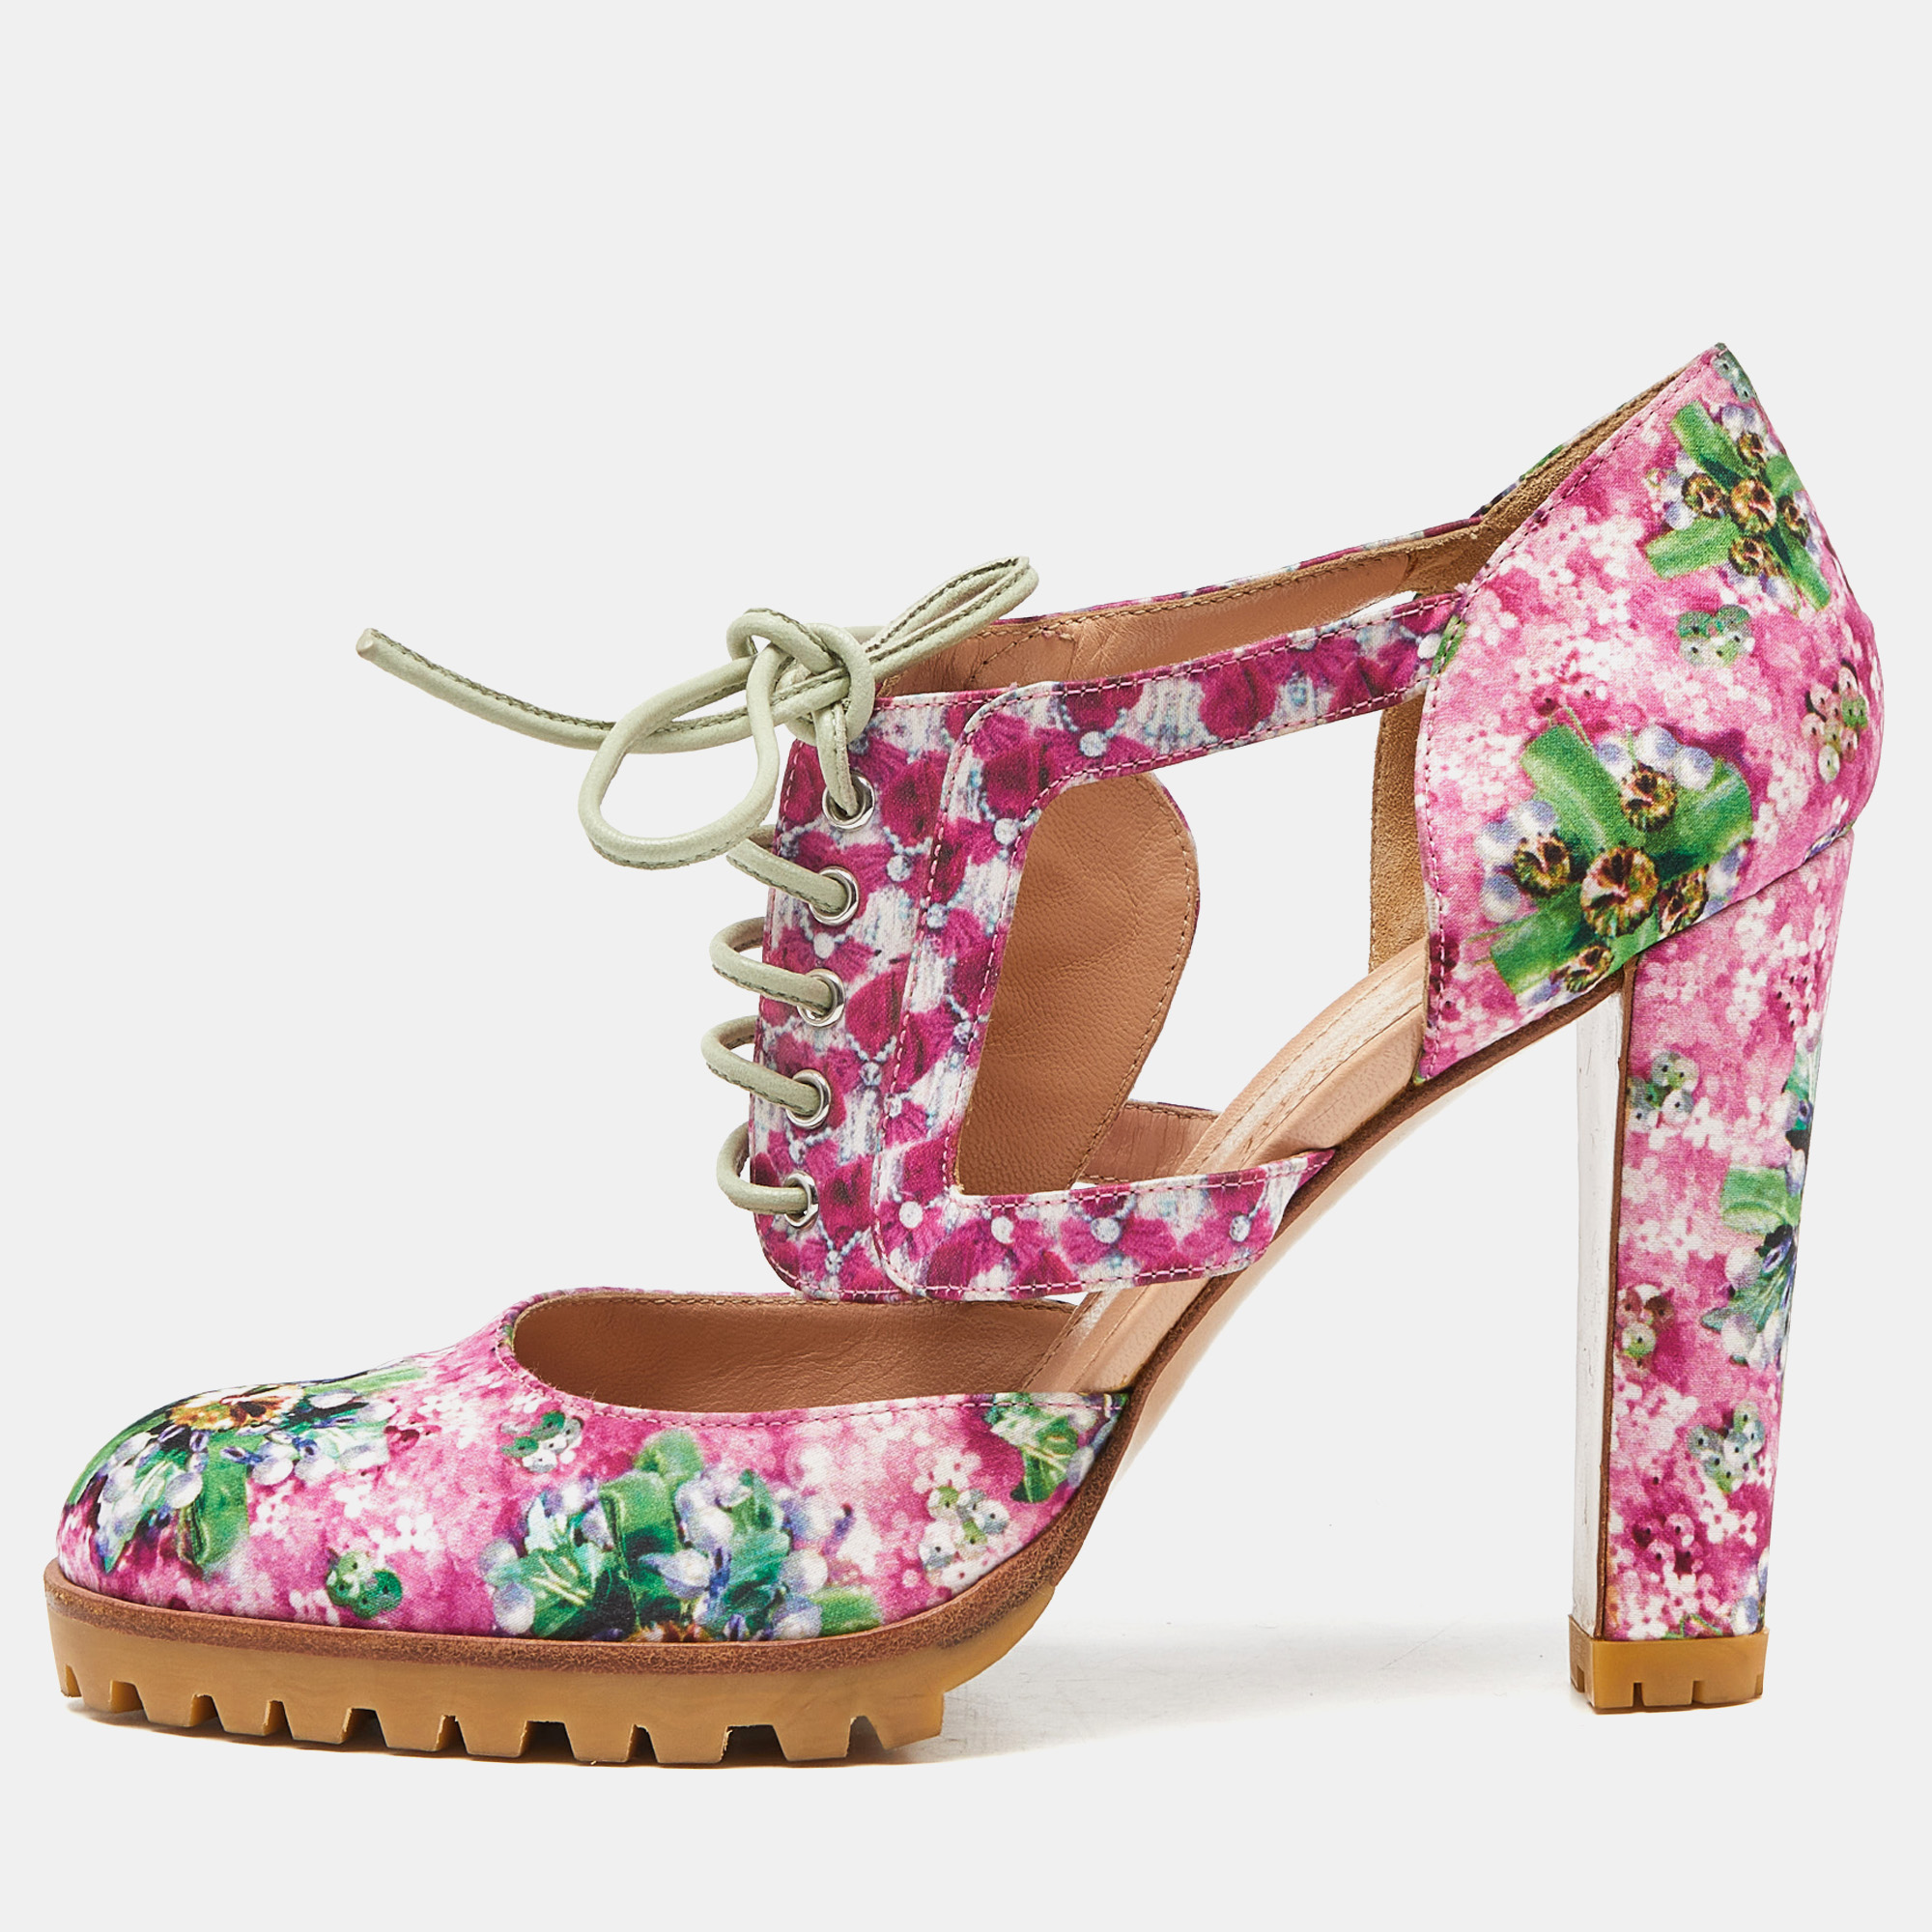 Gianvito rossi multicolor floral print satin cut out ankle pumps size 39